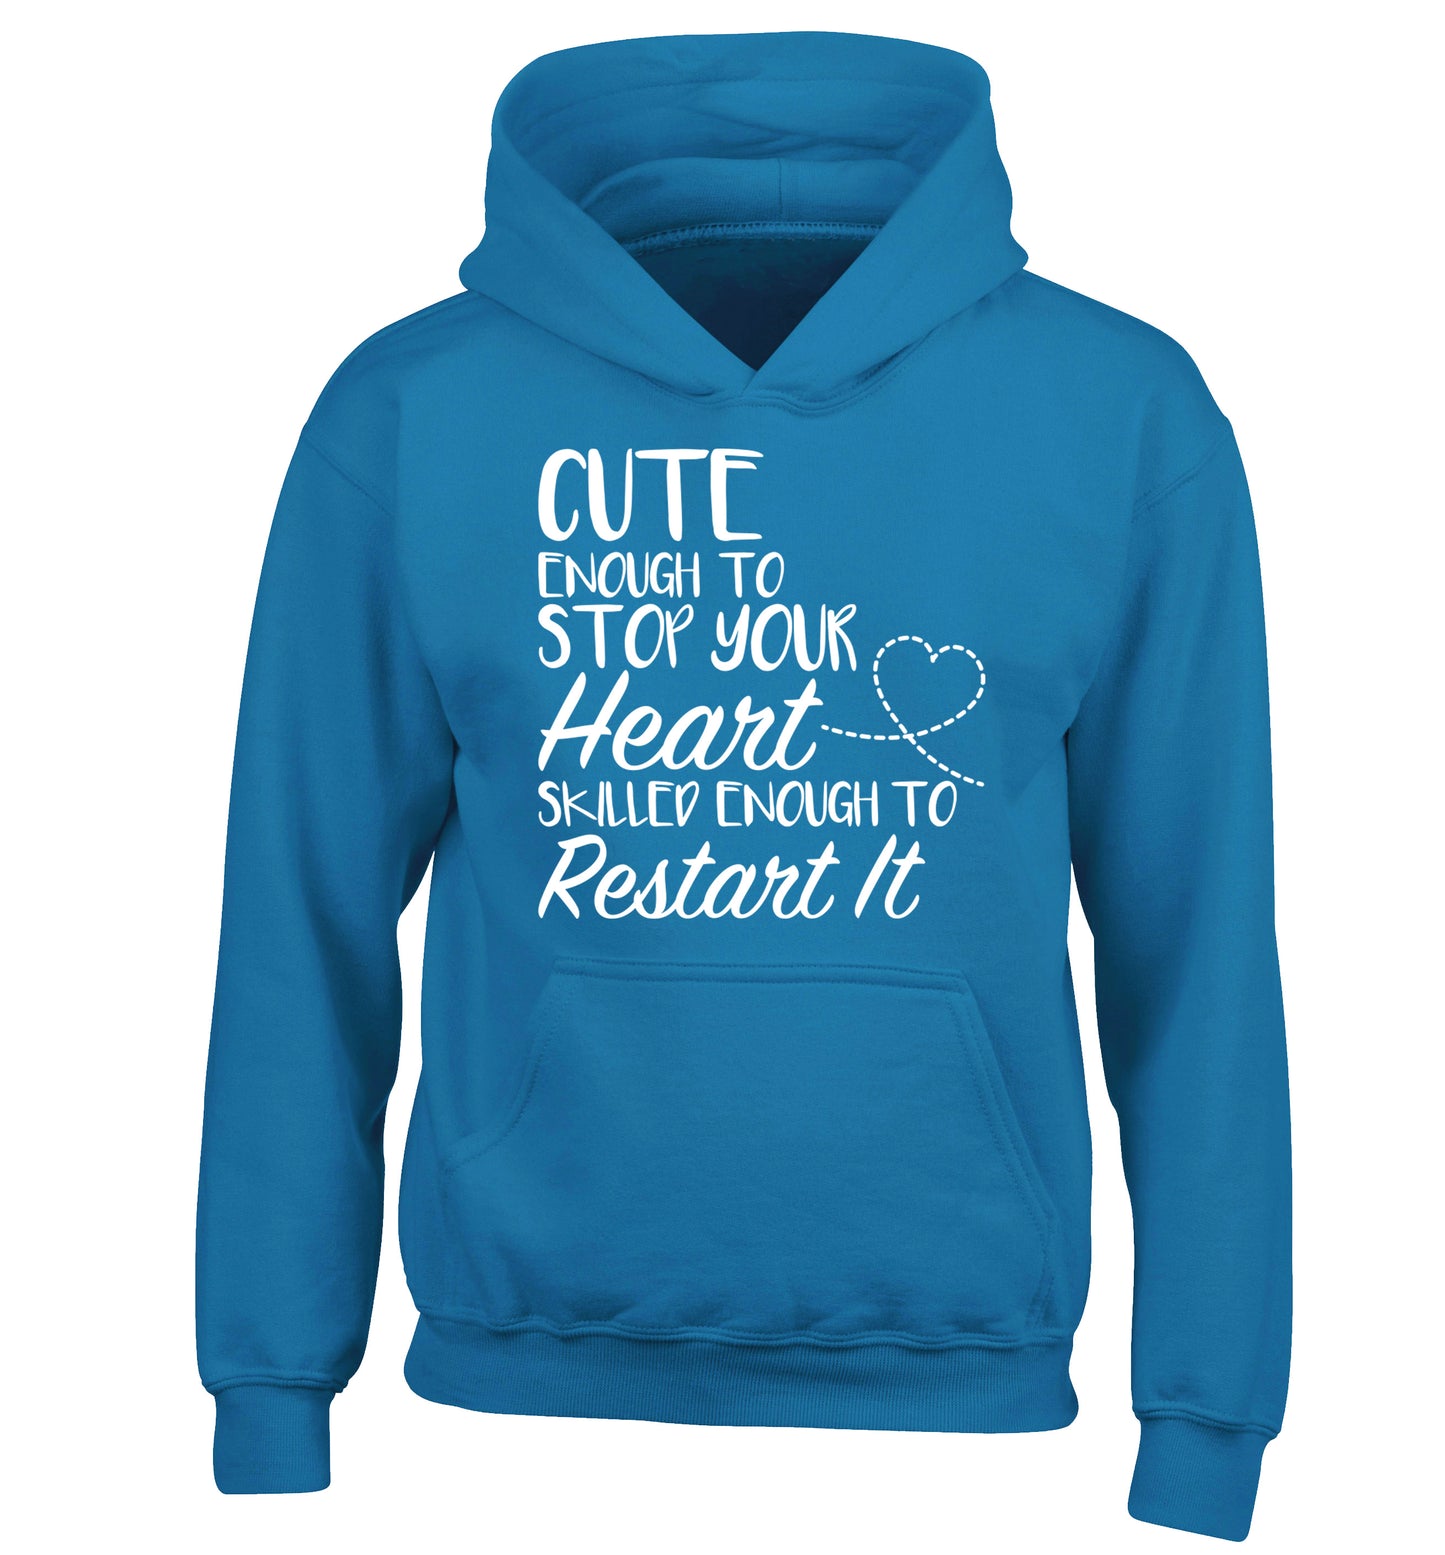 Cute enough to stop your heart skilled enough to restart it children's blue hoodie 12-13 Years